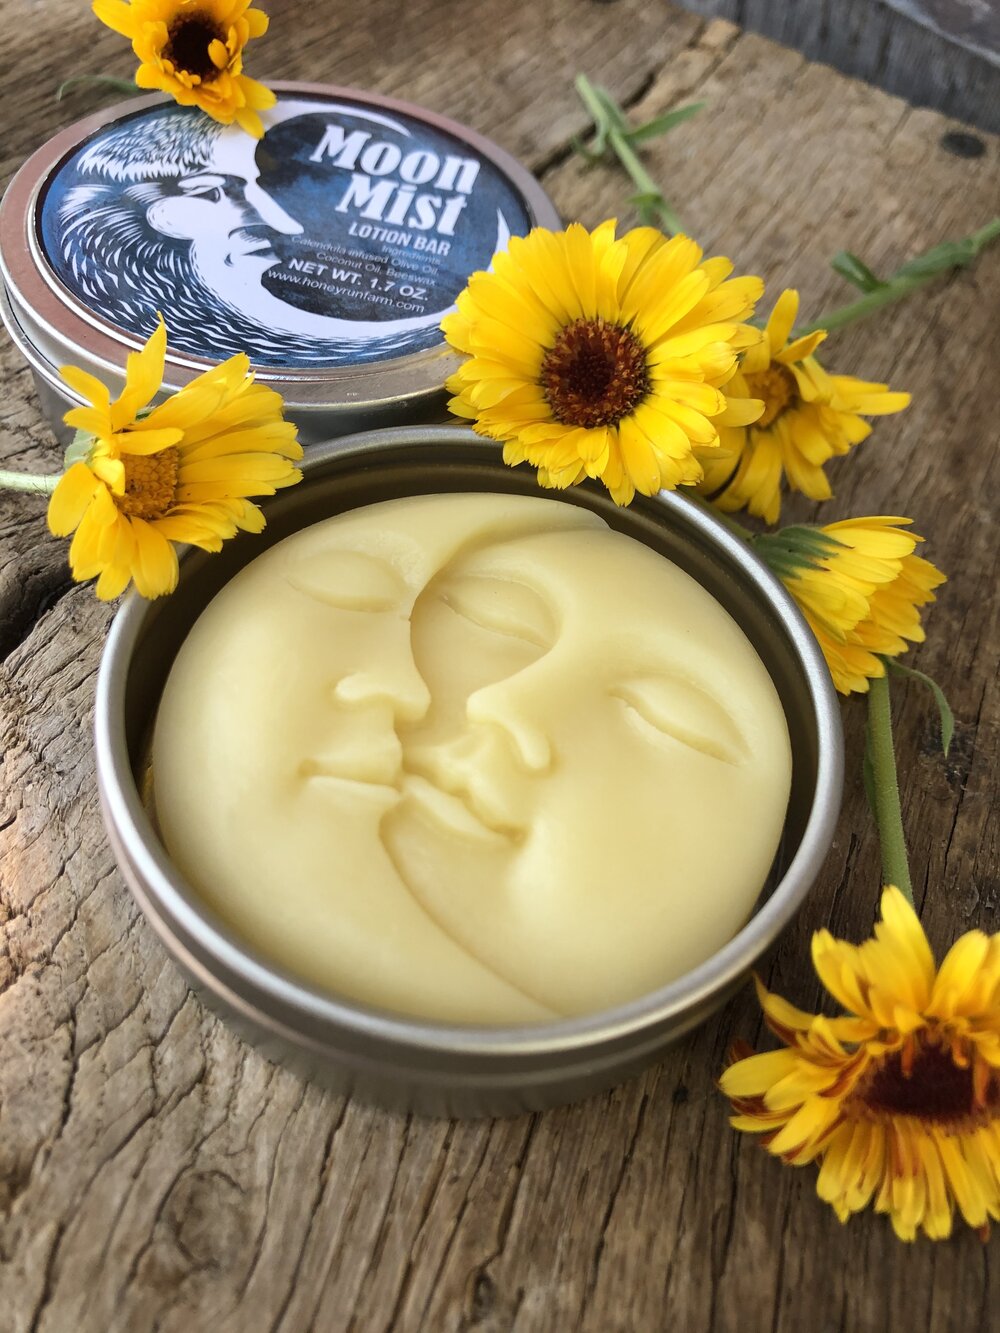 Moon Mist Lotion Bar - made with beeswax, coconut oil, and olive oil,  unscented — Honeyrun Farm